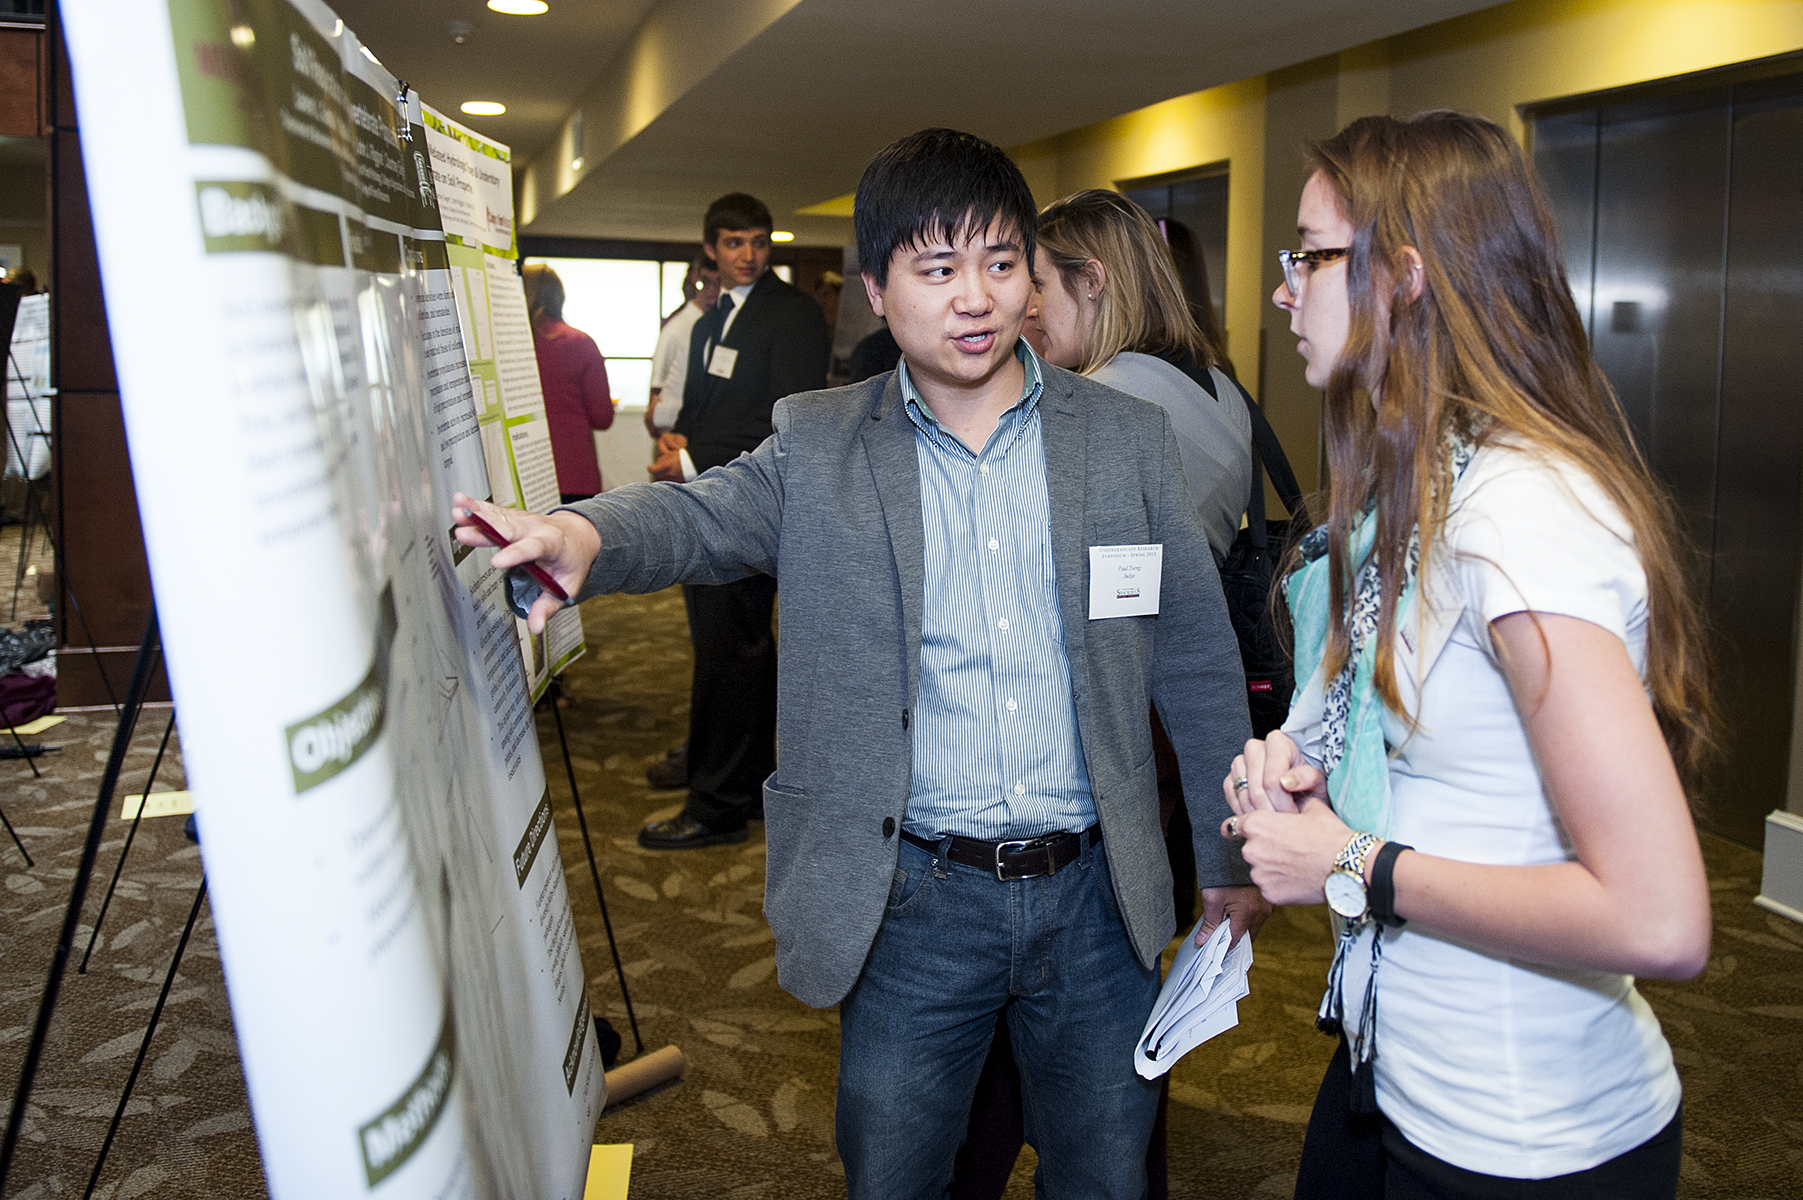 Sophomore Lauren L. Gamblin, a horticulture/floriculture and ornamental major of Akron, Ohio, discusses her project with Te-Ming "Paul" Tseng, assistant professor of plant and soil sciences, during MSU's 2015 Undergraduate Research Symposium.